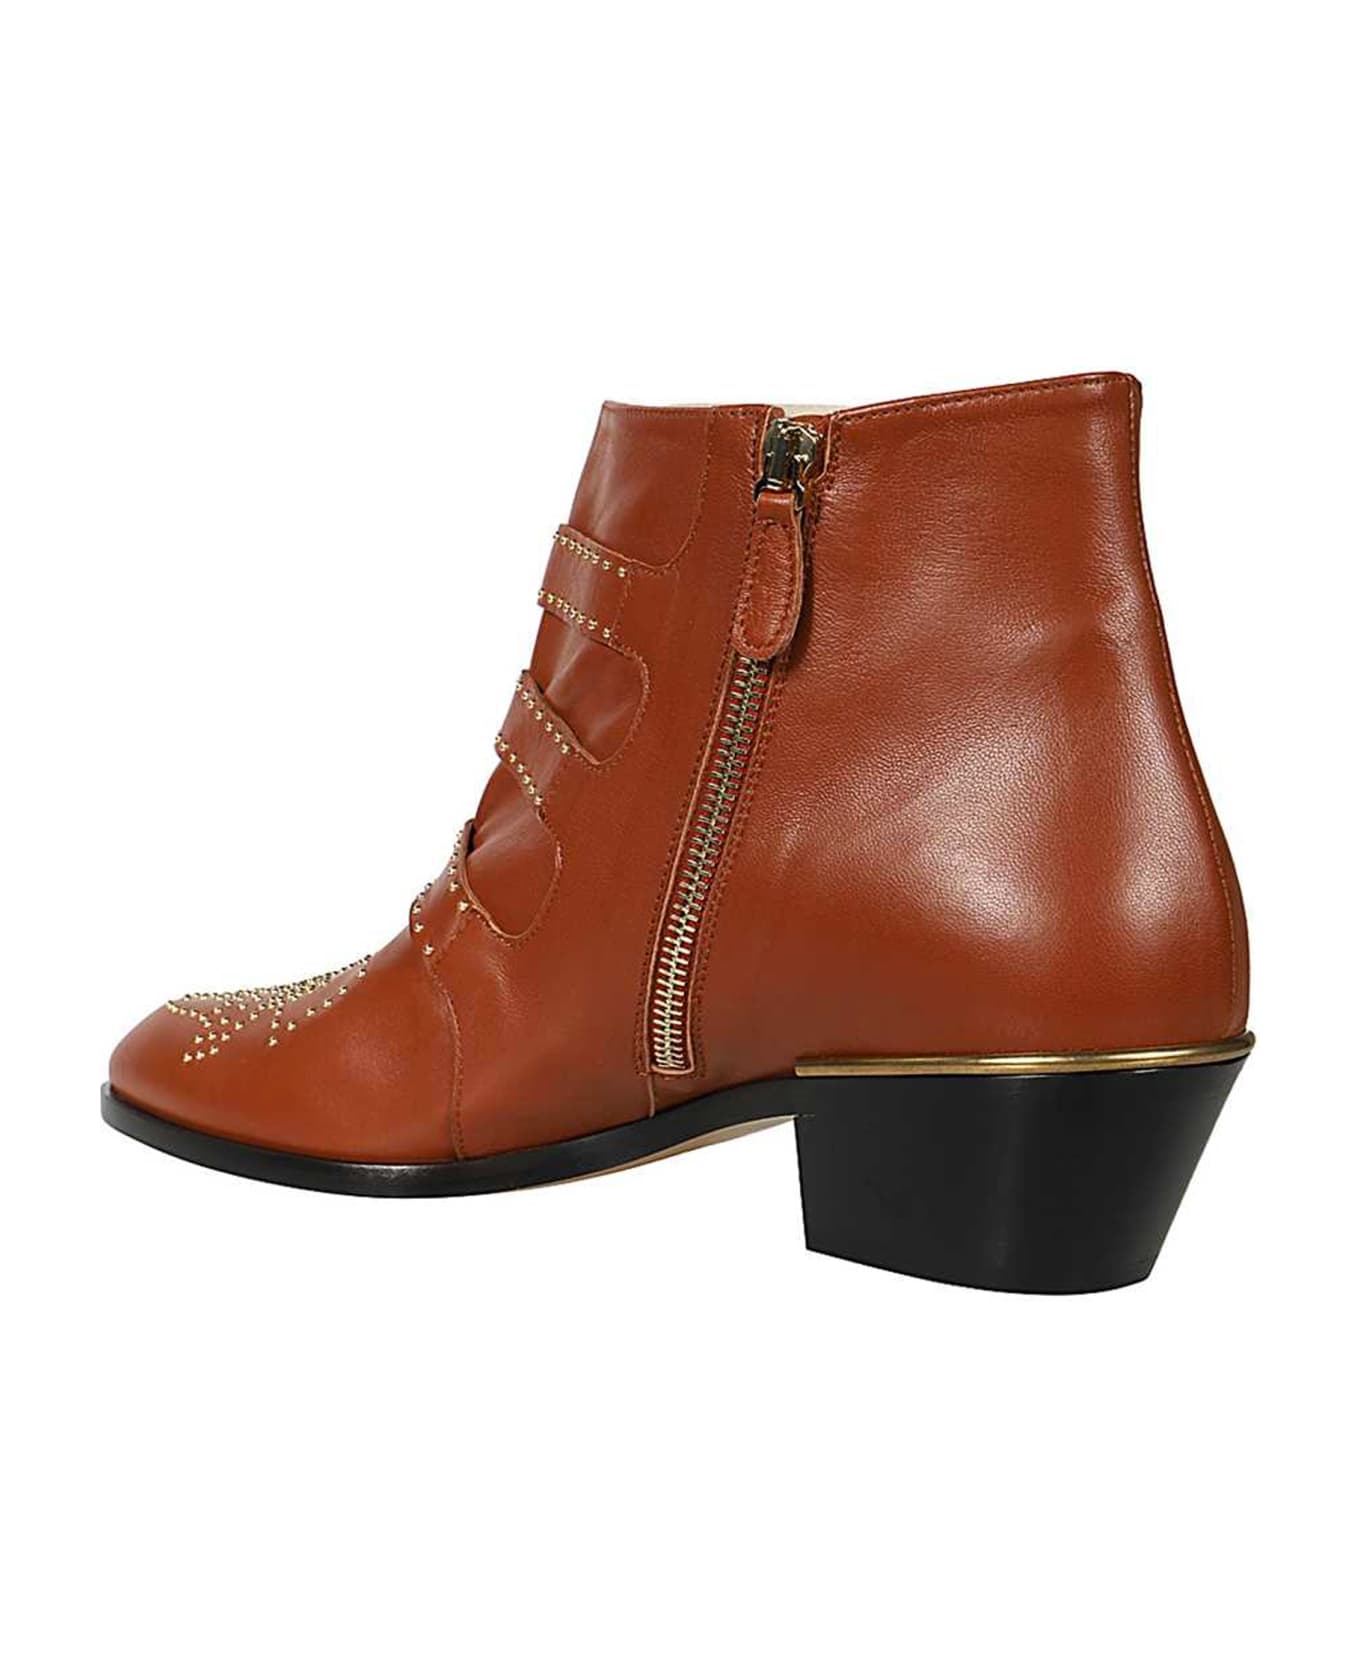 Chloé Leather Susanna Boots - Brown ブーツ